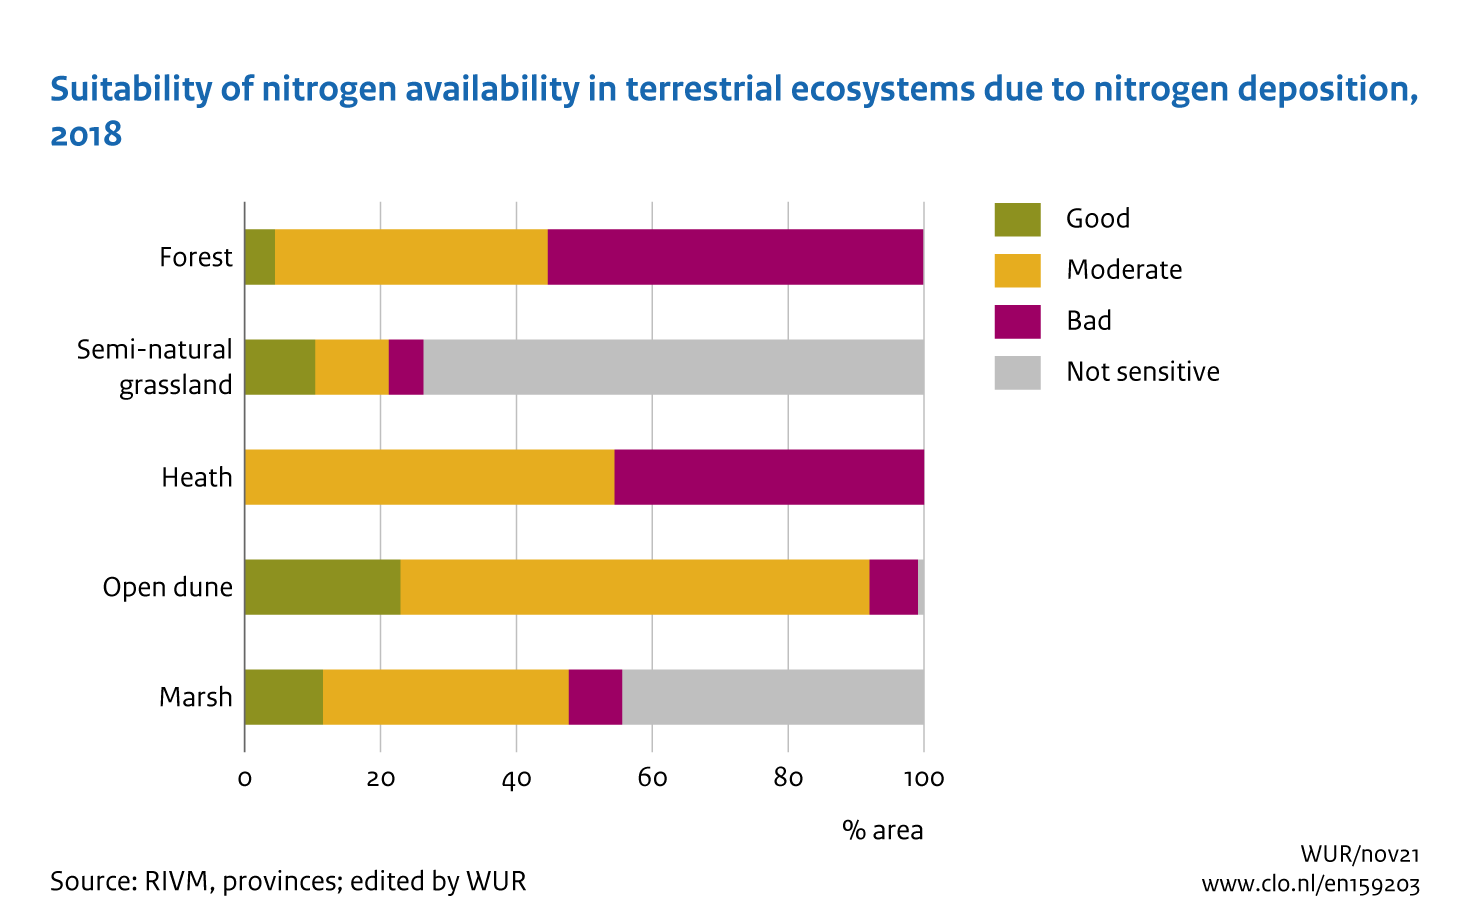 Image Suitability of nitrogen availability in terrestrial ecosystems due to nitrogen deposition,2018. The image is further explained in the text.